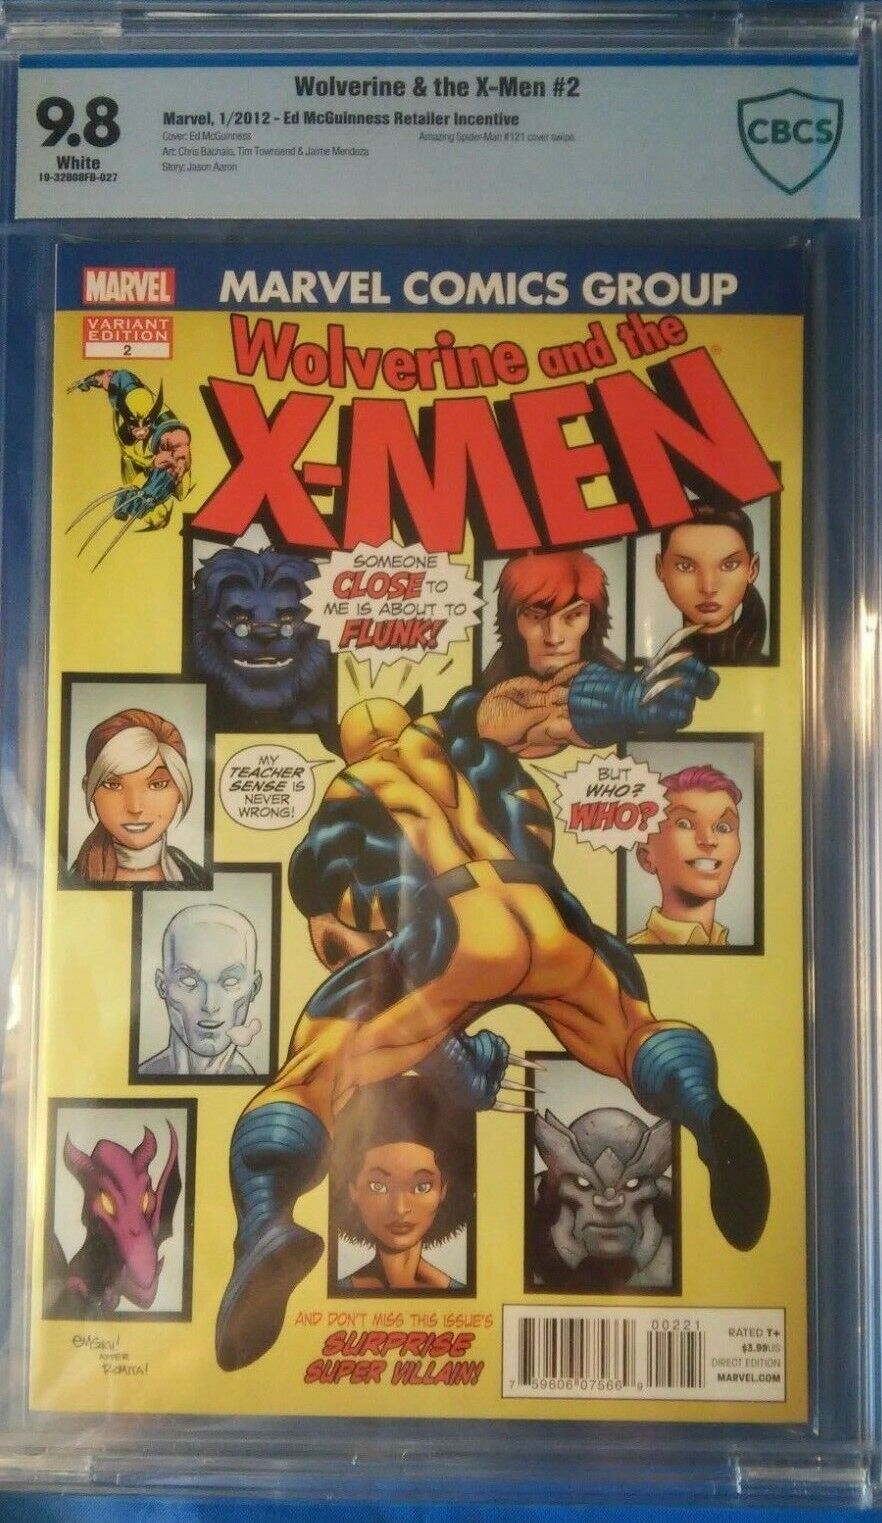 Wolverine and the X-Men #2B - CBCS 9.8 - Limited 1 for 50 VARIANT